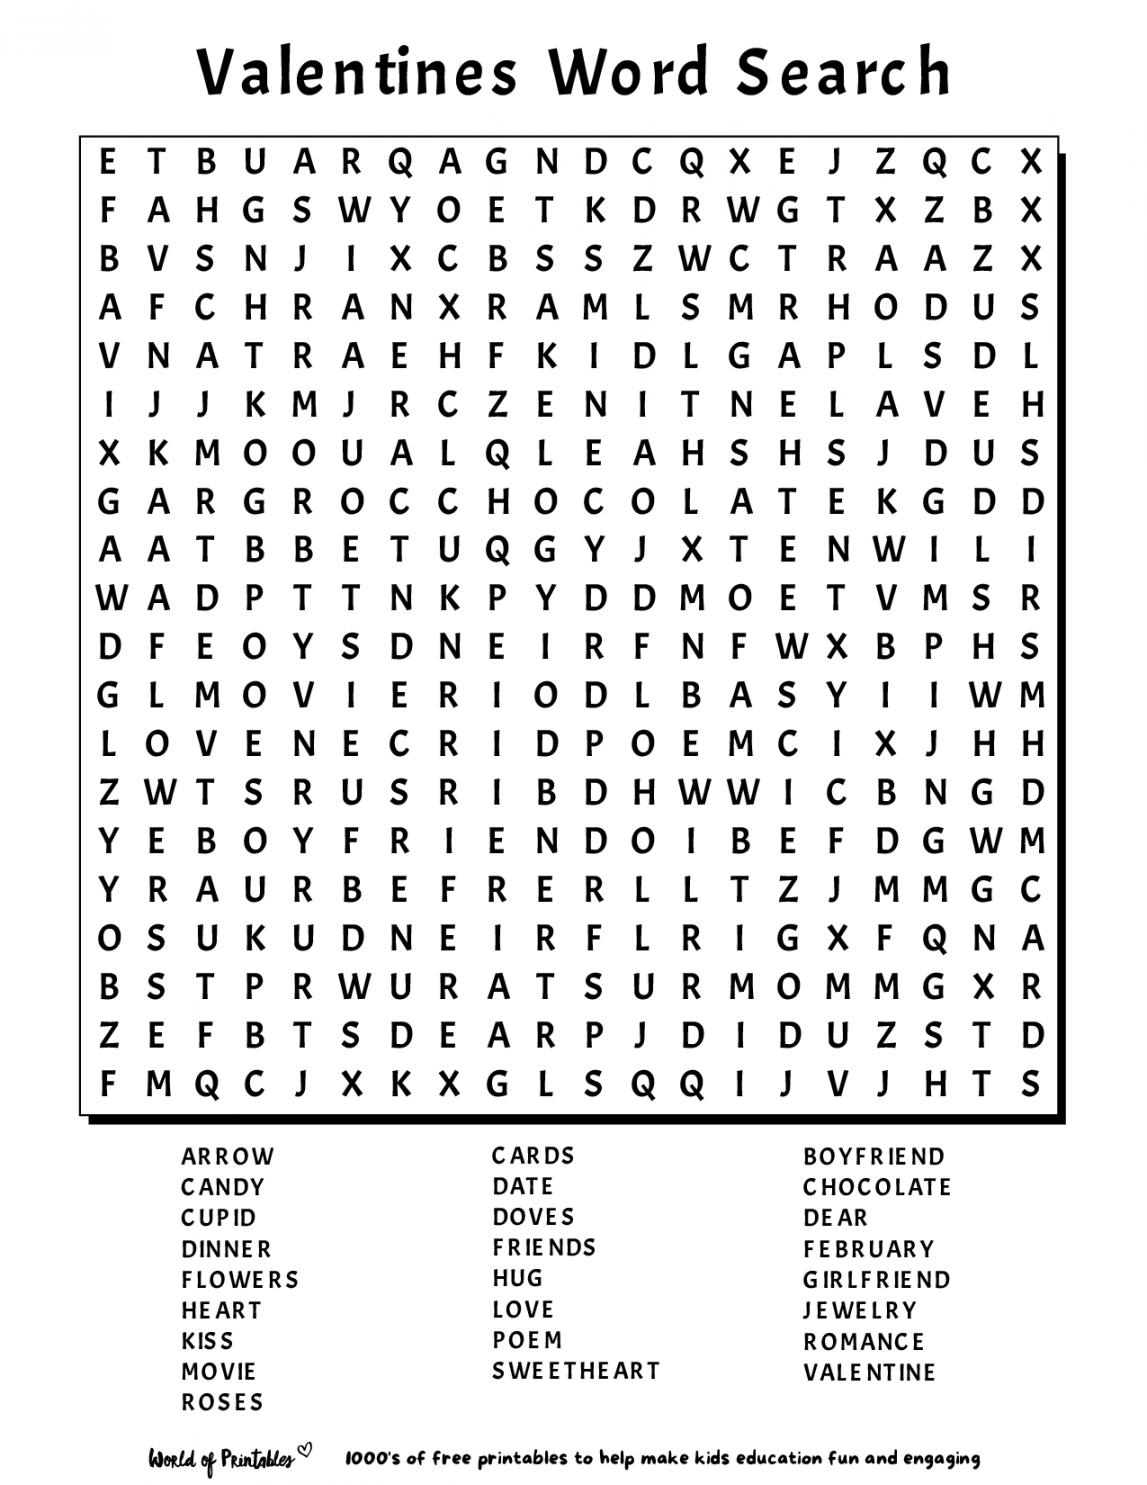 Word Search Puzzles Printable Free - Printable - Printable Word Search  World of Printables